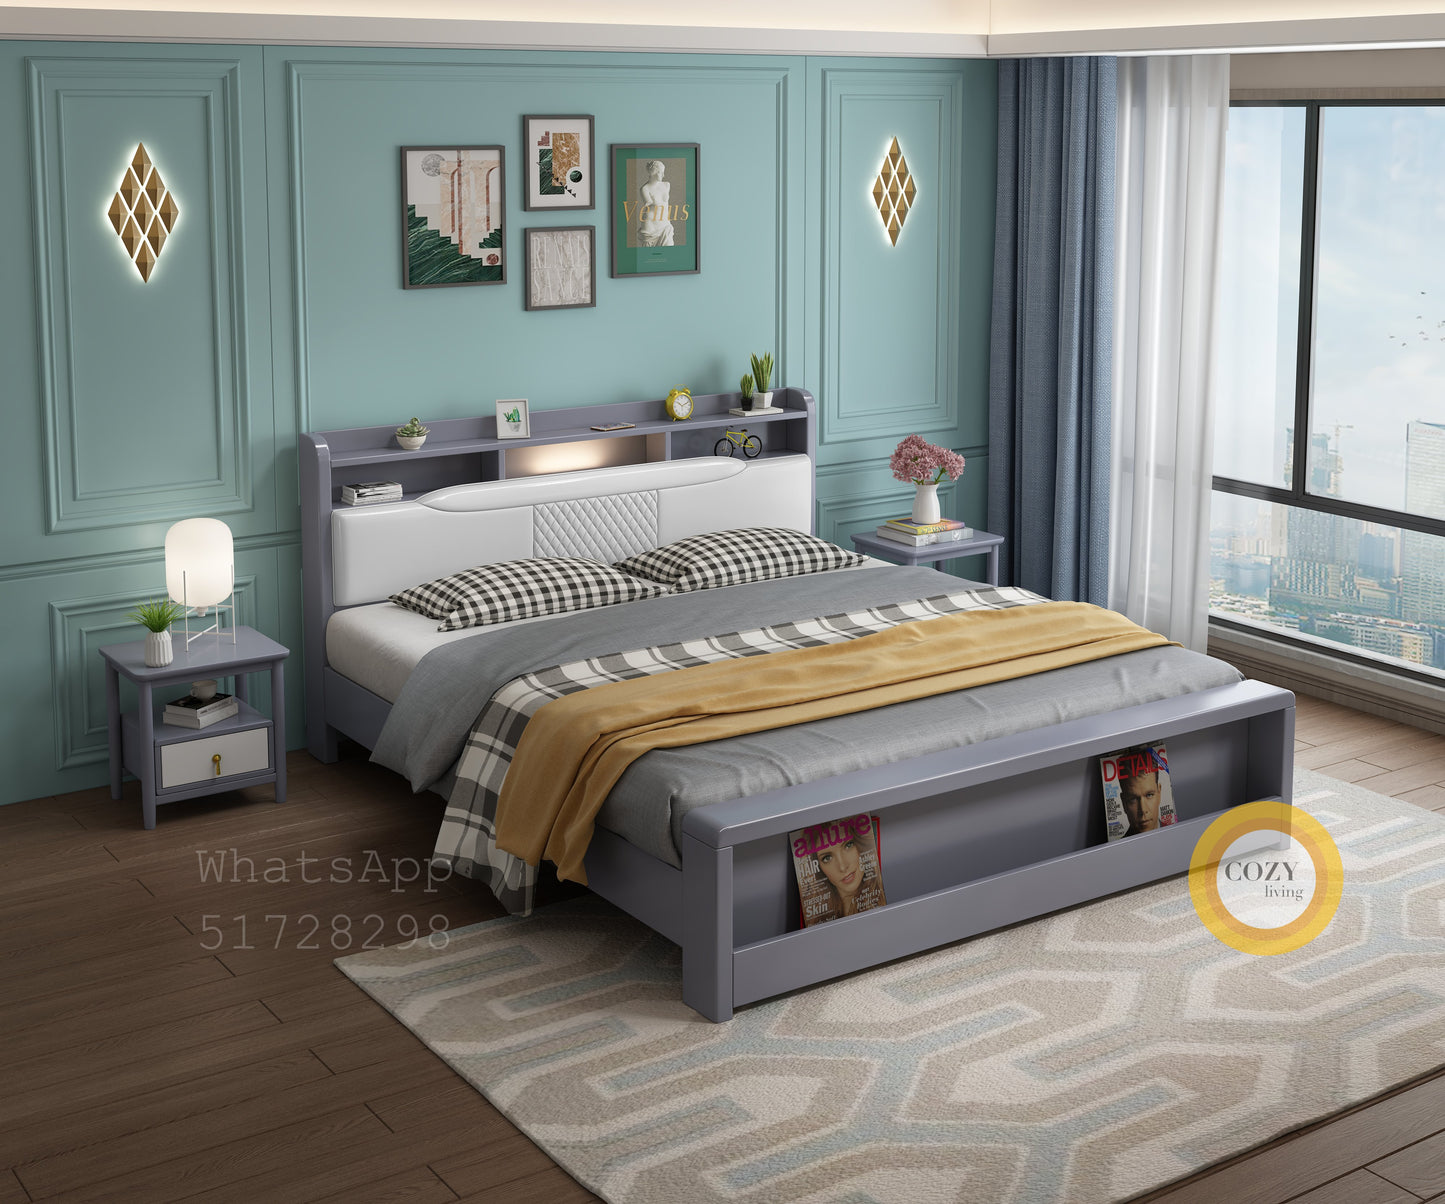 998 Nordic solid wood bed 